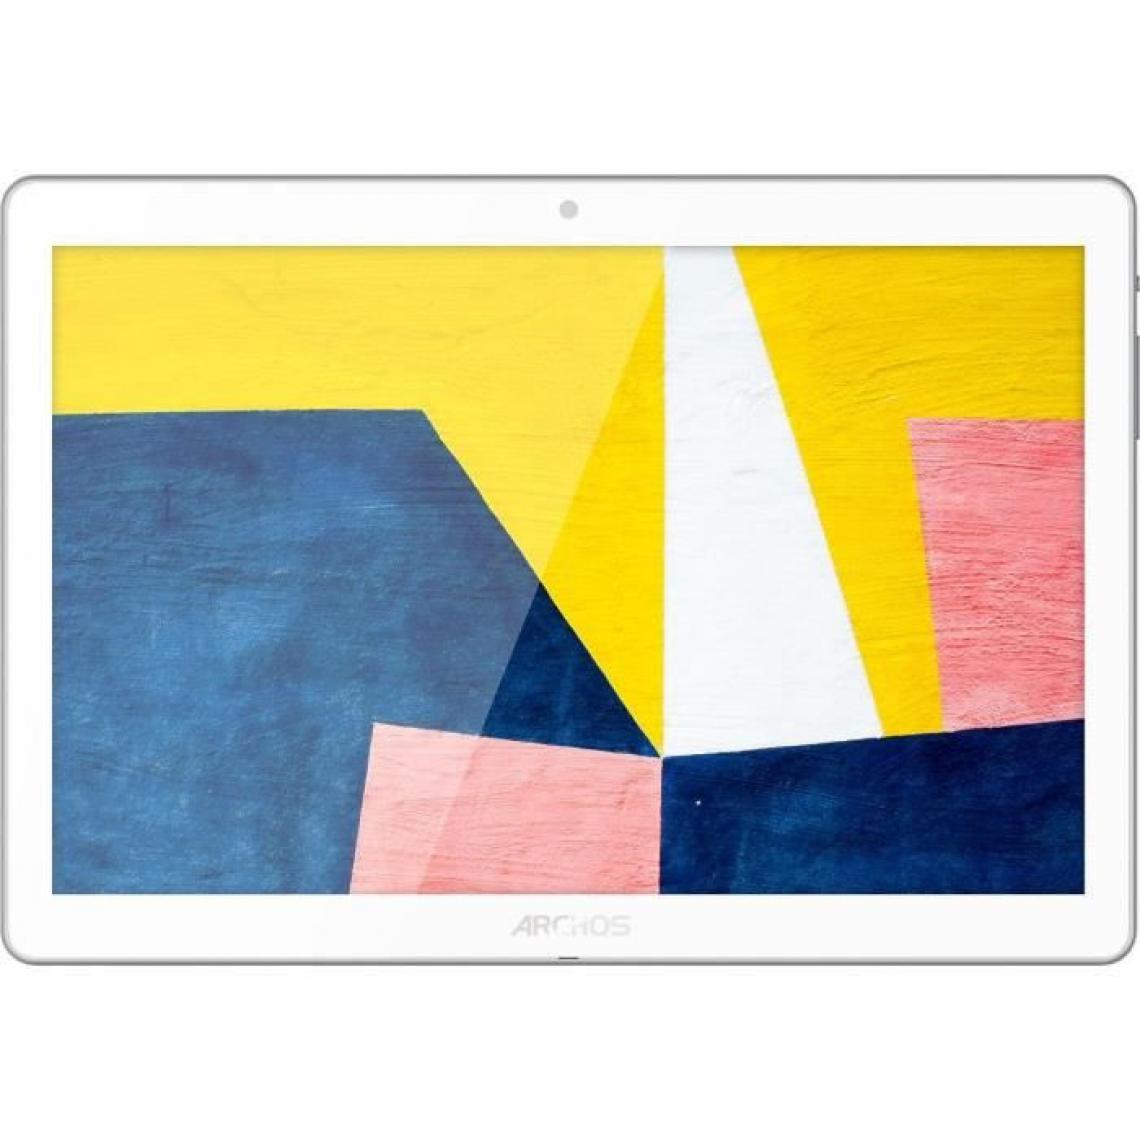 Archos - Tablette Tactile - ARCHOS - T96 Wi-Fi - 9,6 HD - RAM 2 Go - Stockage 32 Go - Quad Core - Android 11 Go Edition - Blanc - Tablette Android